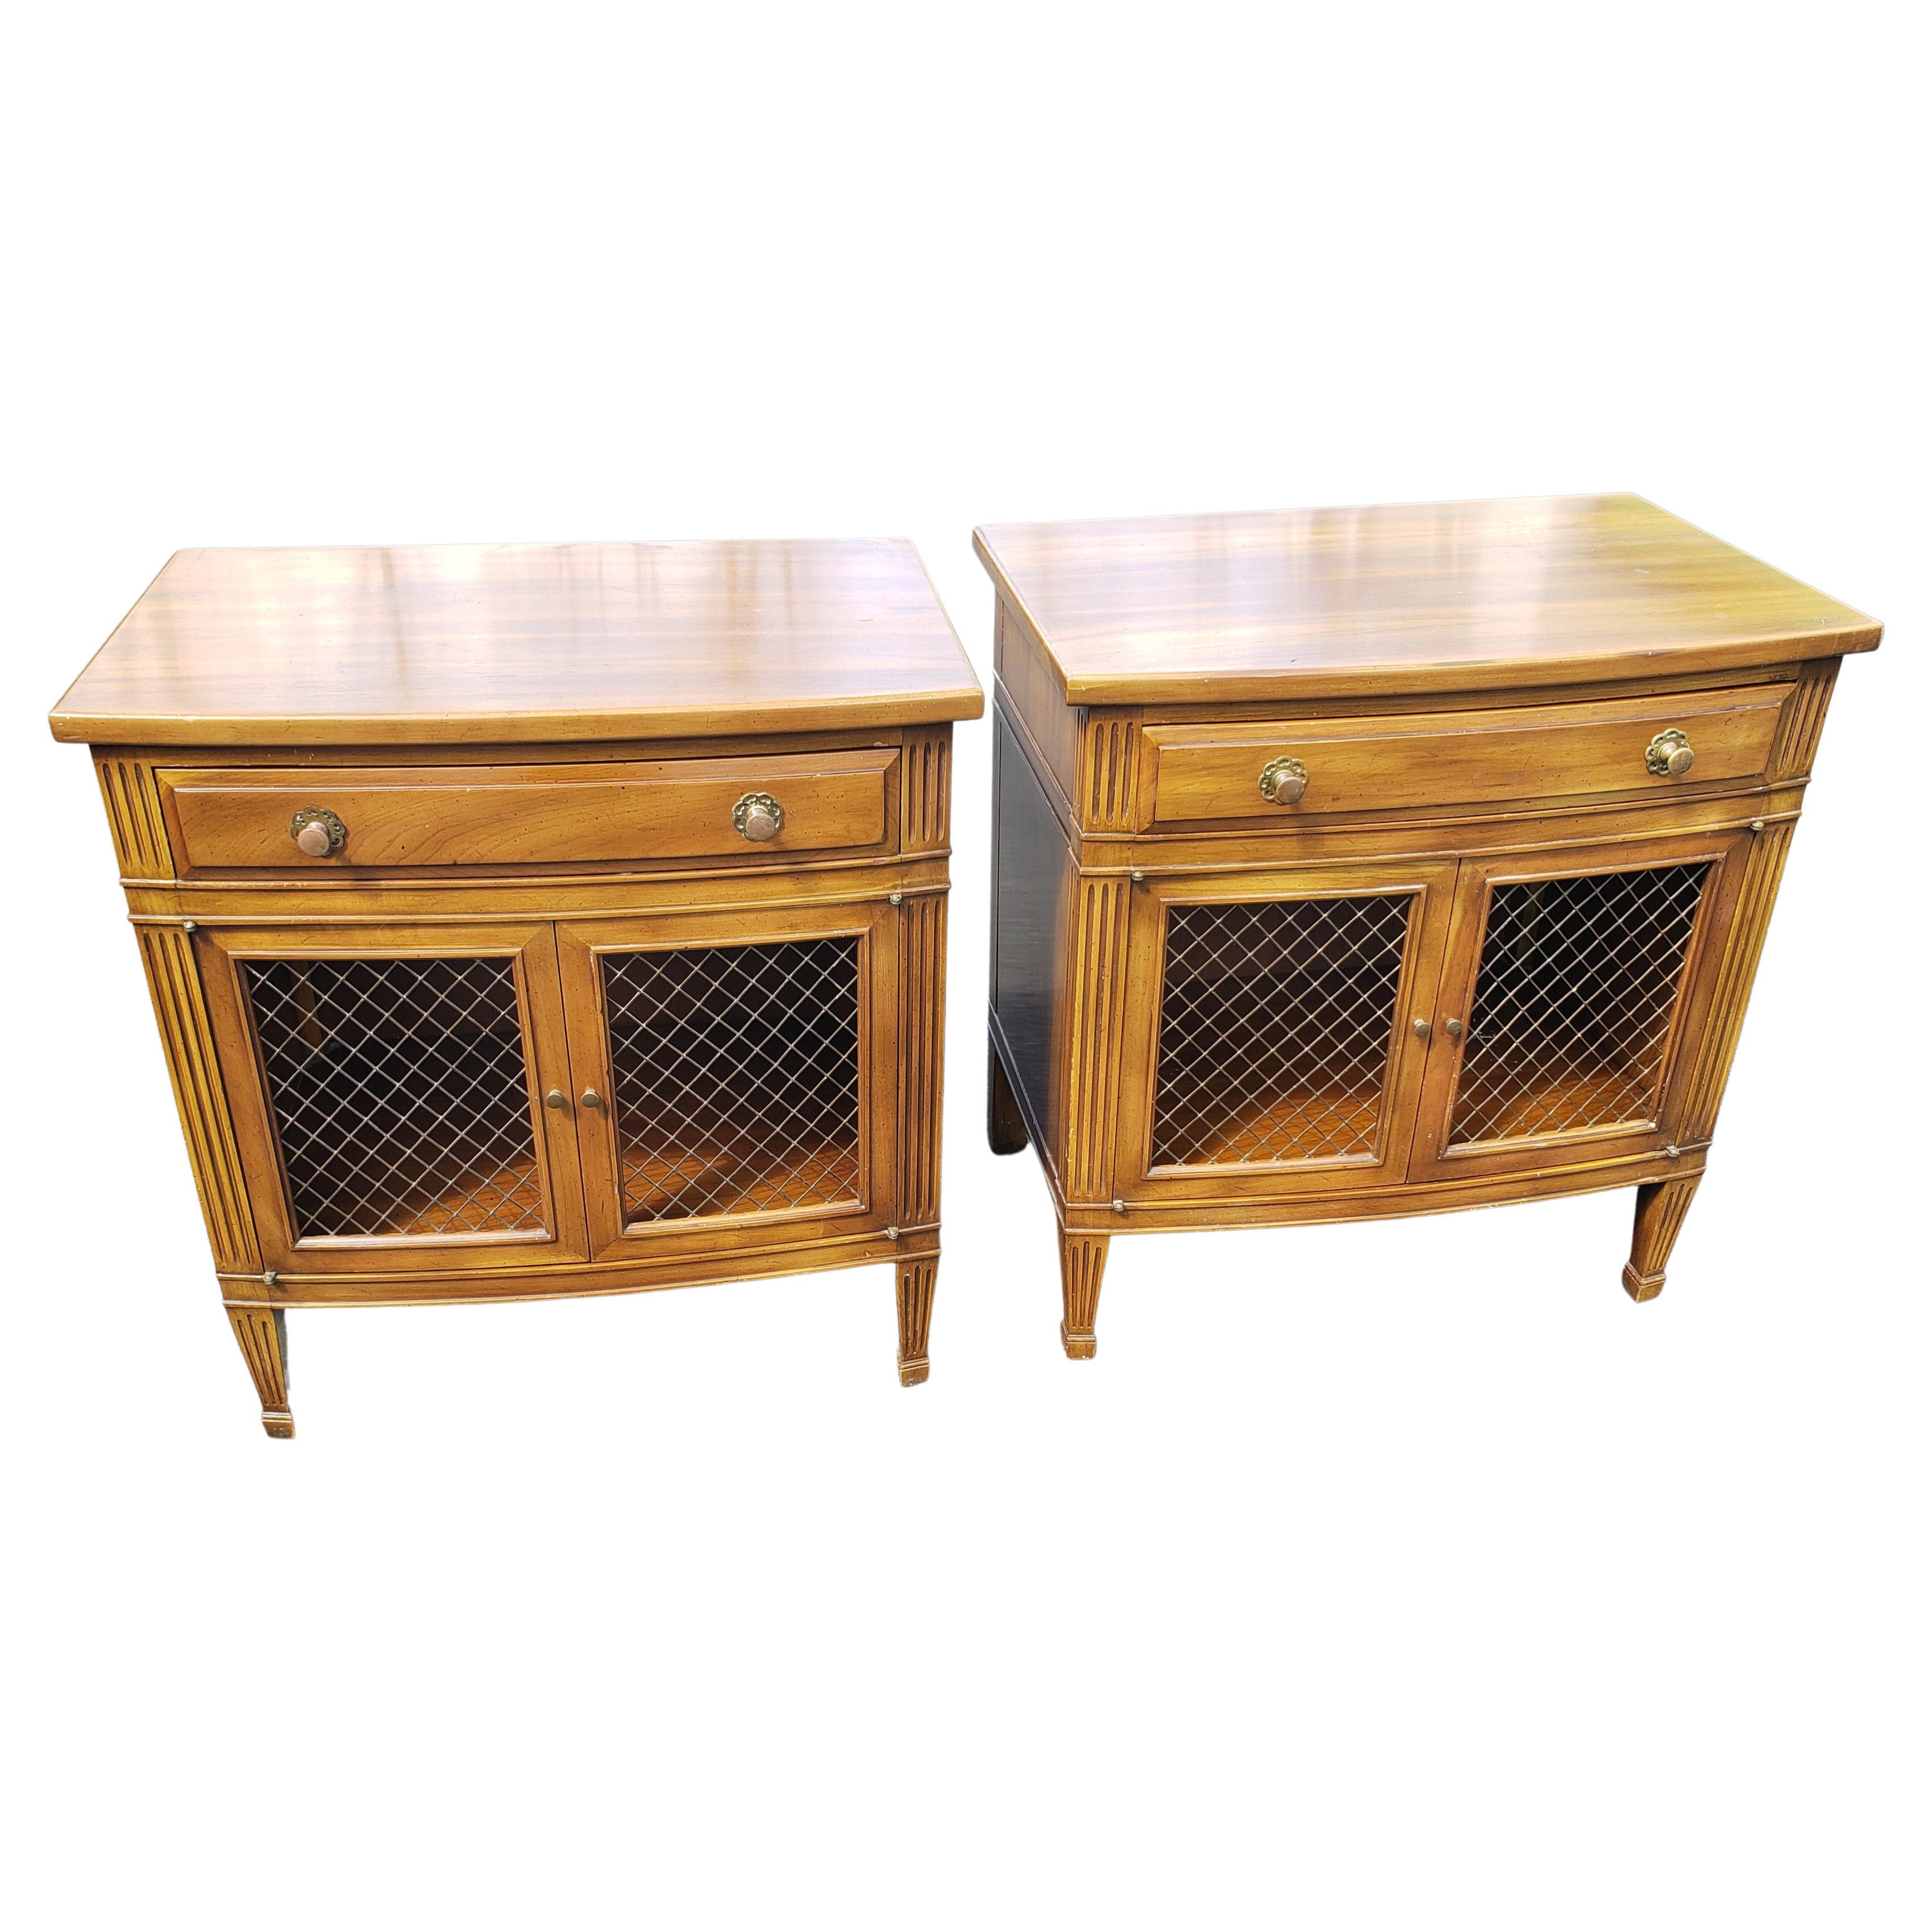 John Widdicomb French Country side tables or nightstands.
Good vintage condition.  We do carry a matching triple dresser in our inventory
From the 1950s
W6032222.